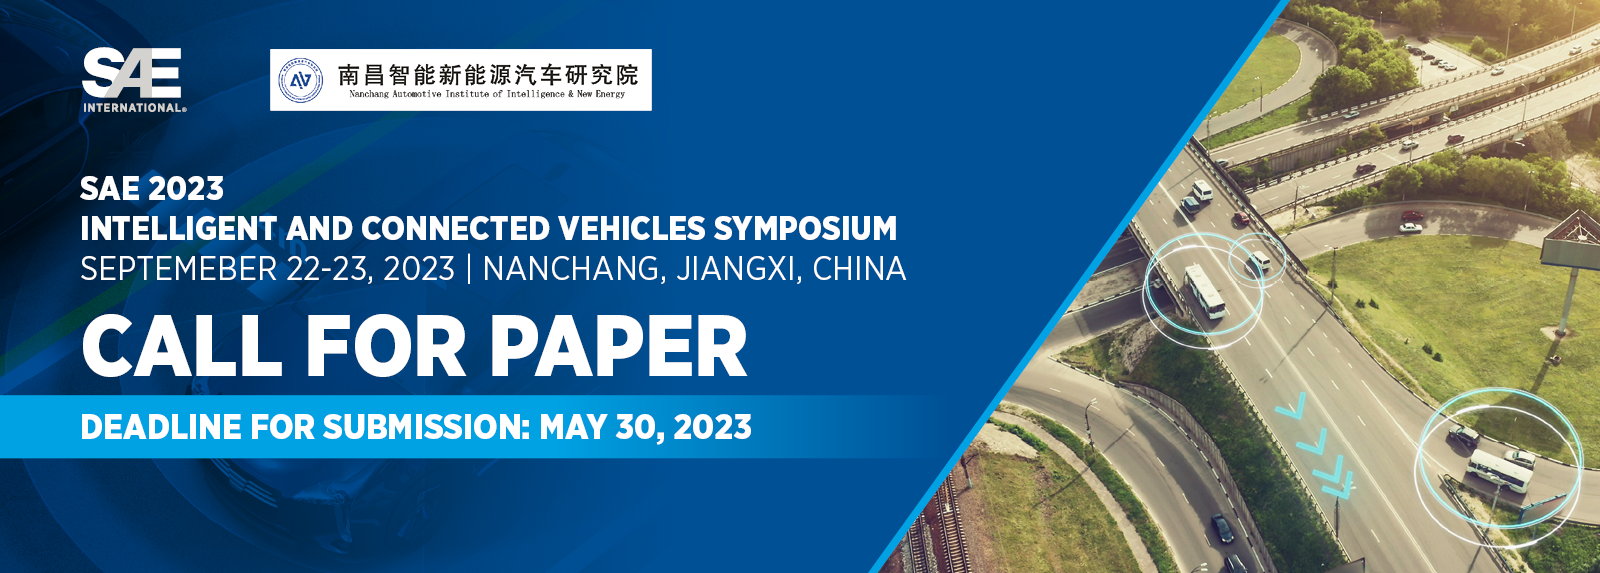 SAE 2023 Intelligent and Connected Vehicles Symposium BagEvent